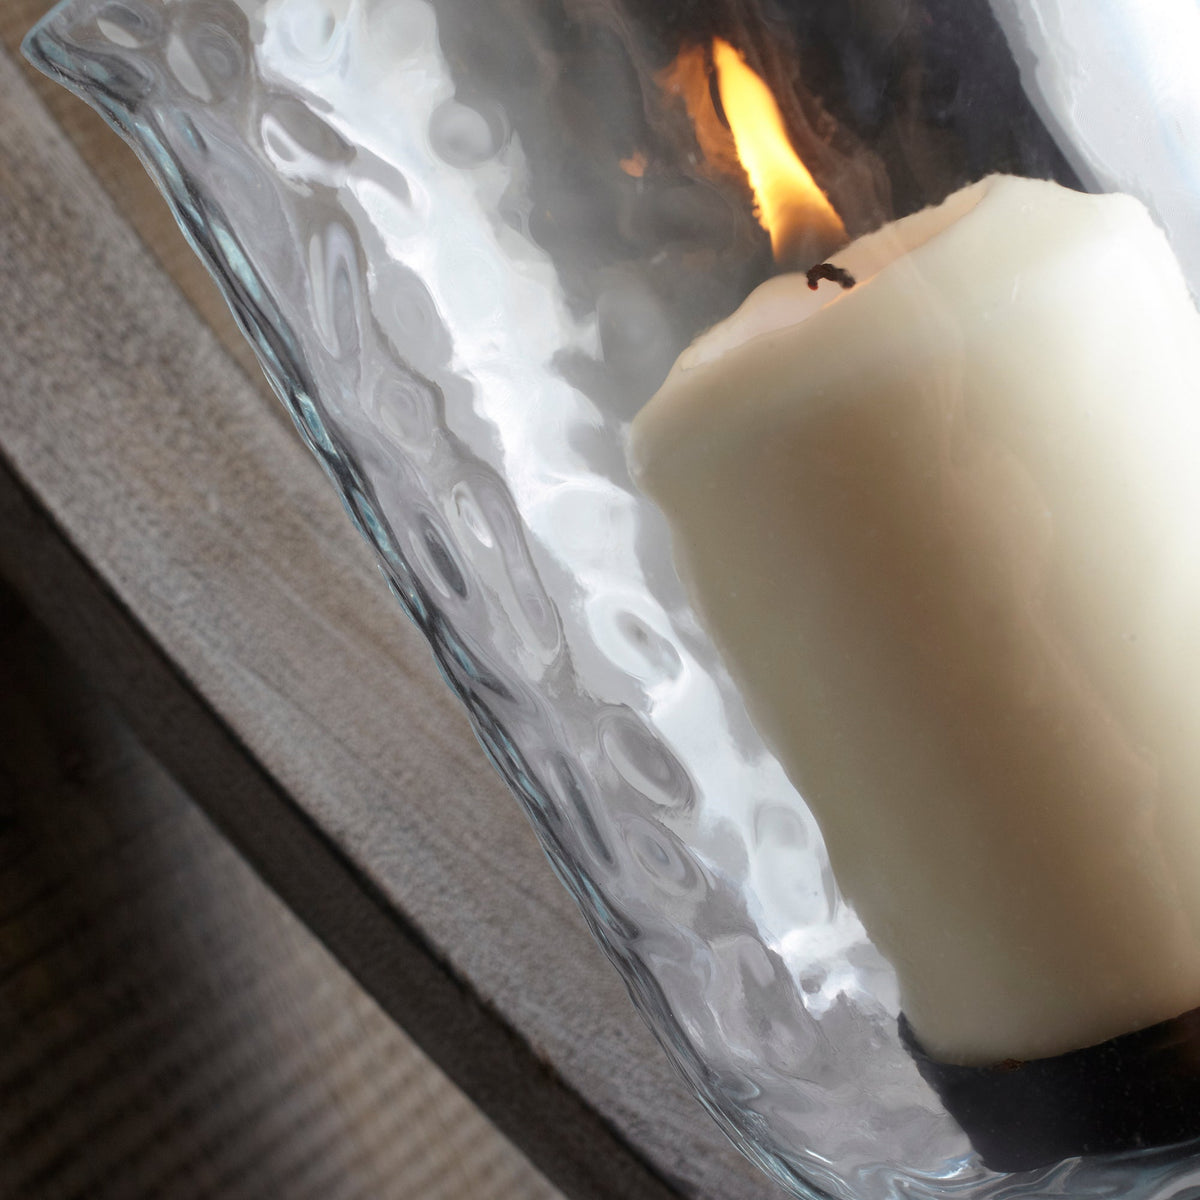 Giorno Wall Candleholder by Cyan